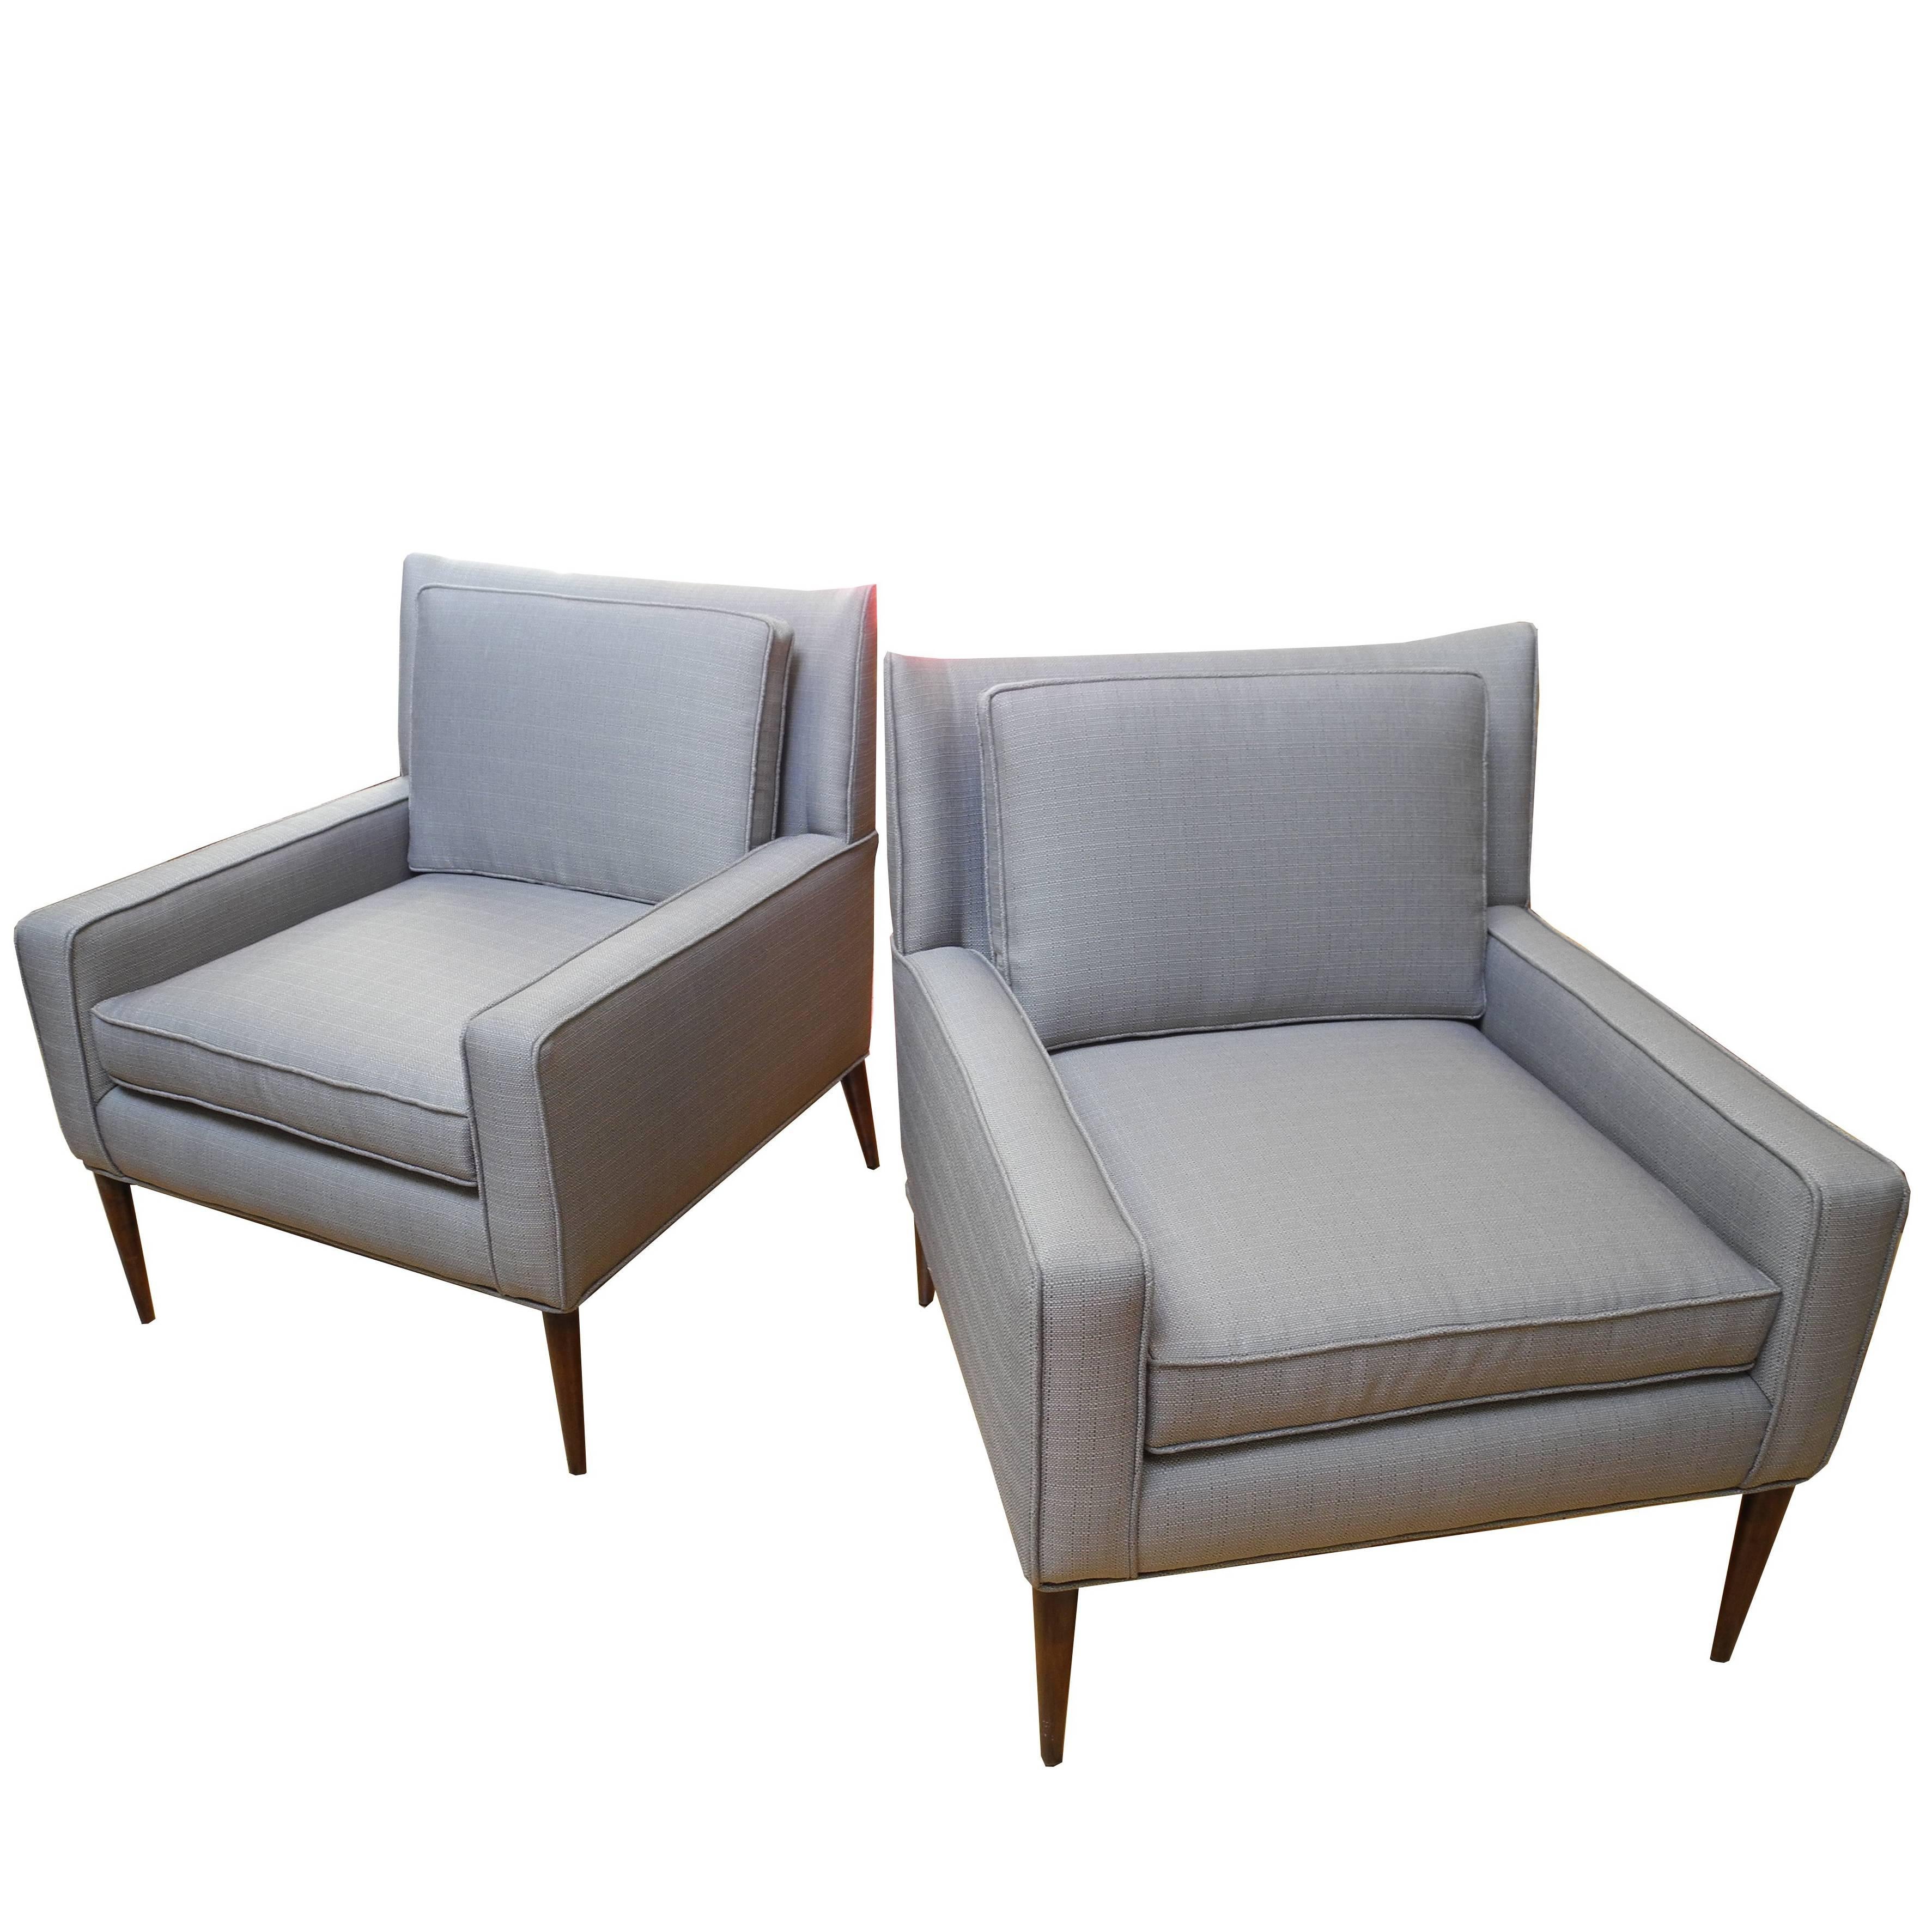 Pair of Modern Upholstered Lounge Chairs Designed by Paul McCobb for Directional For Sale